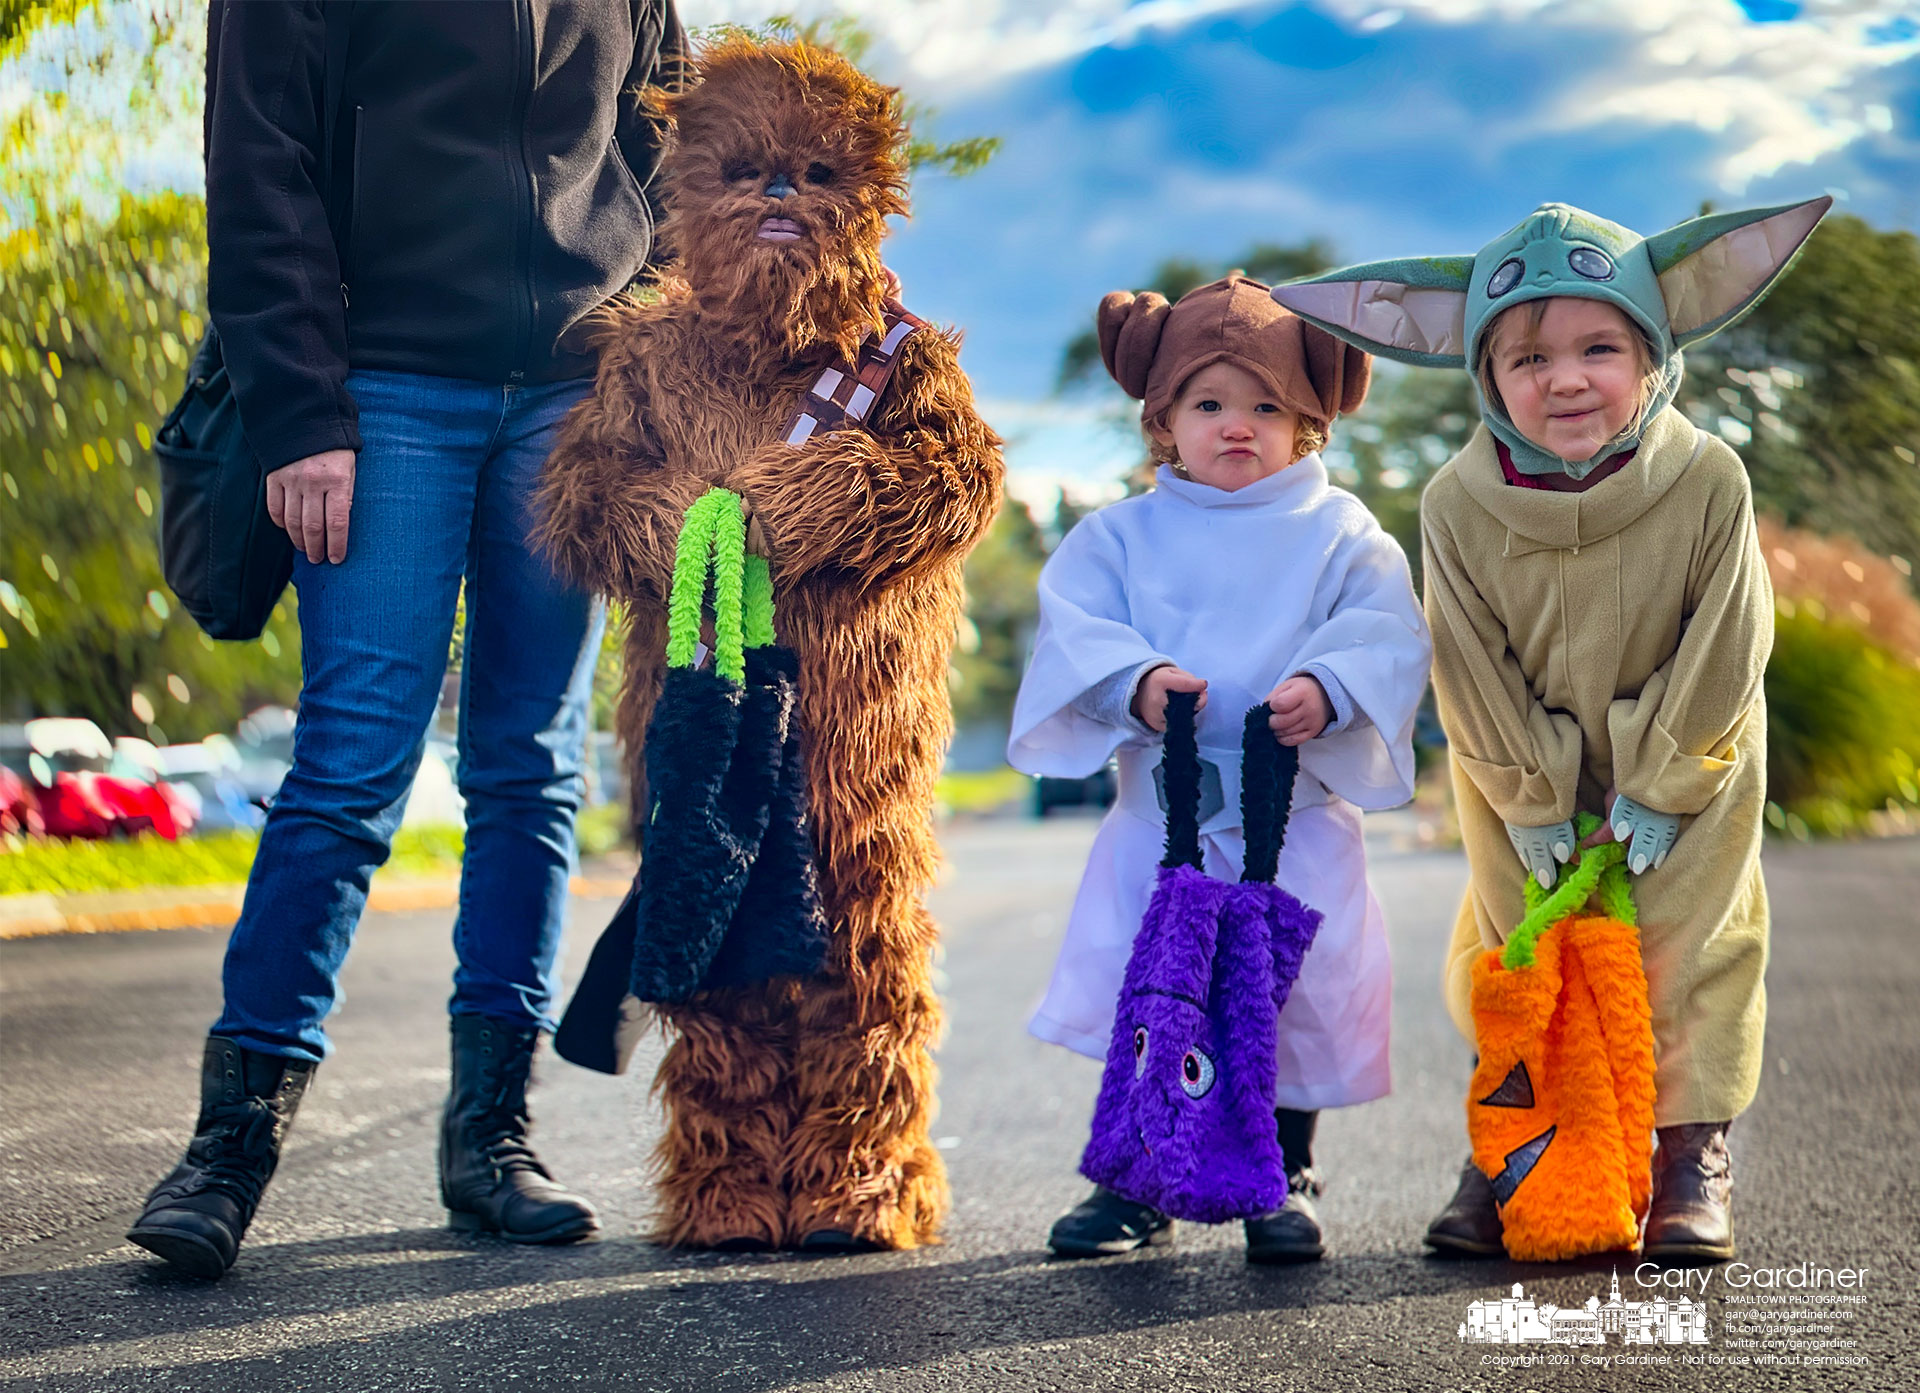 A trio of young Star Wars fans pause before going to "Trunk or Treat" at Westerville Community Church where they hope they might use The Force to fill their bags with candy. My Final Photo for Oct. 16, 2021.